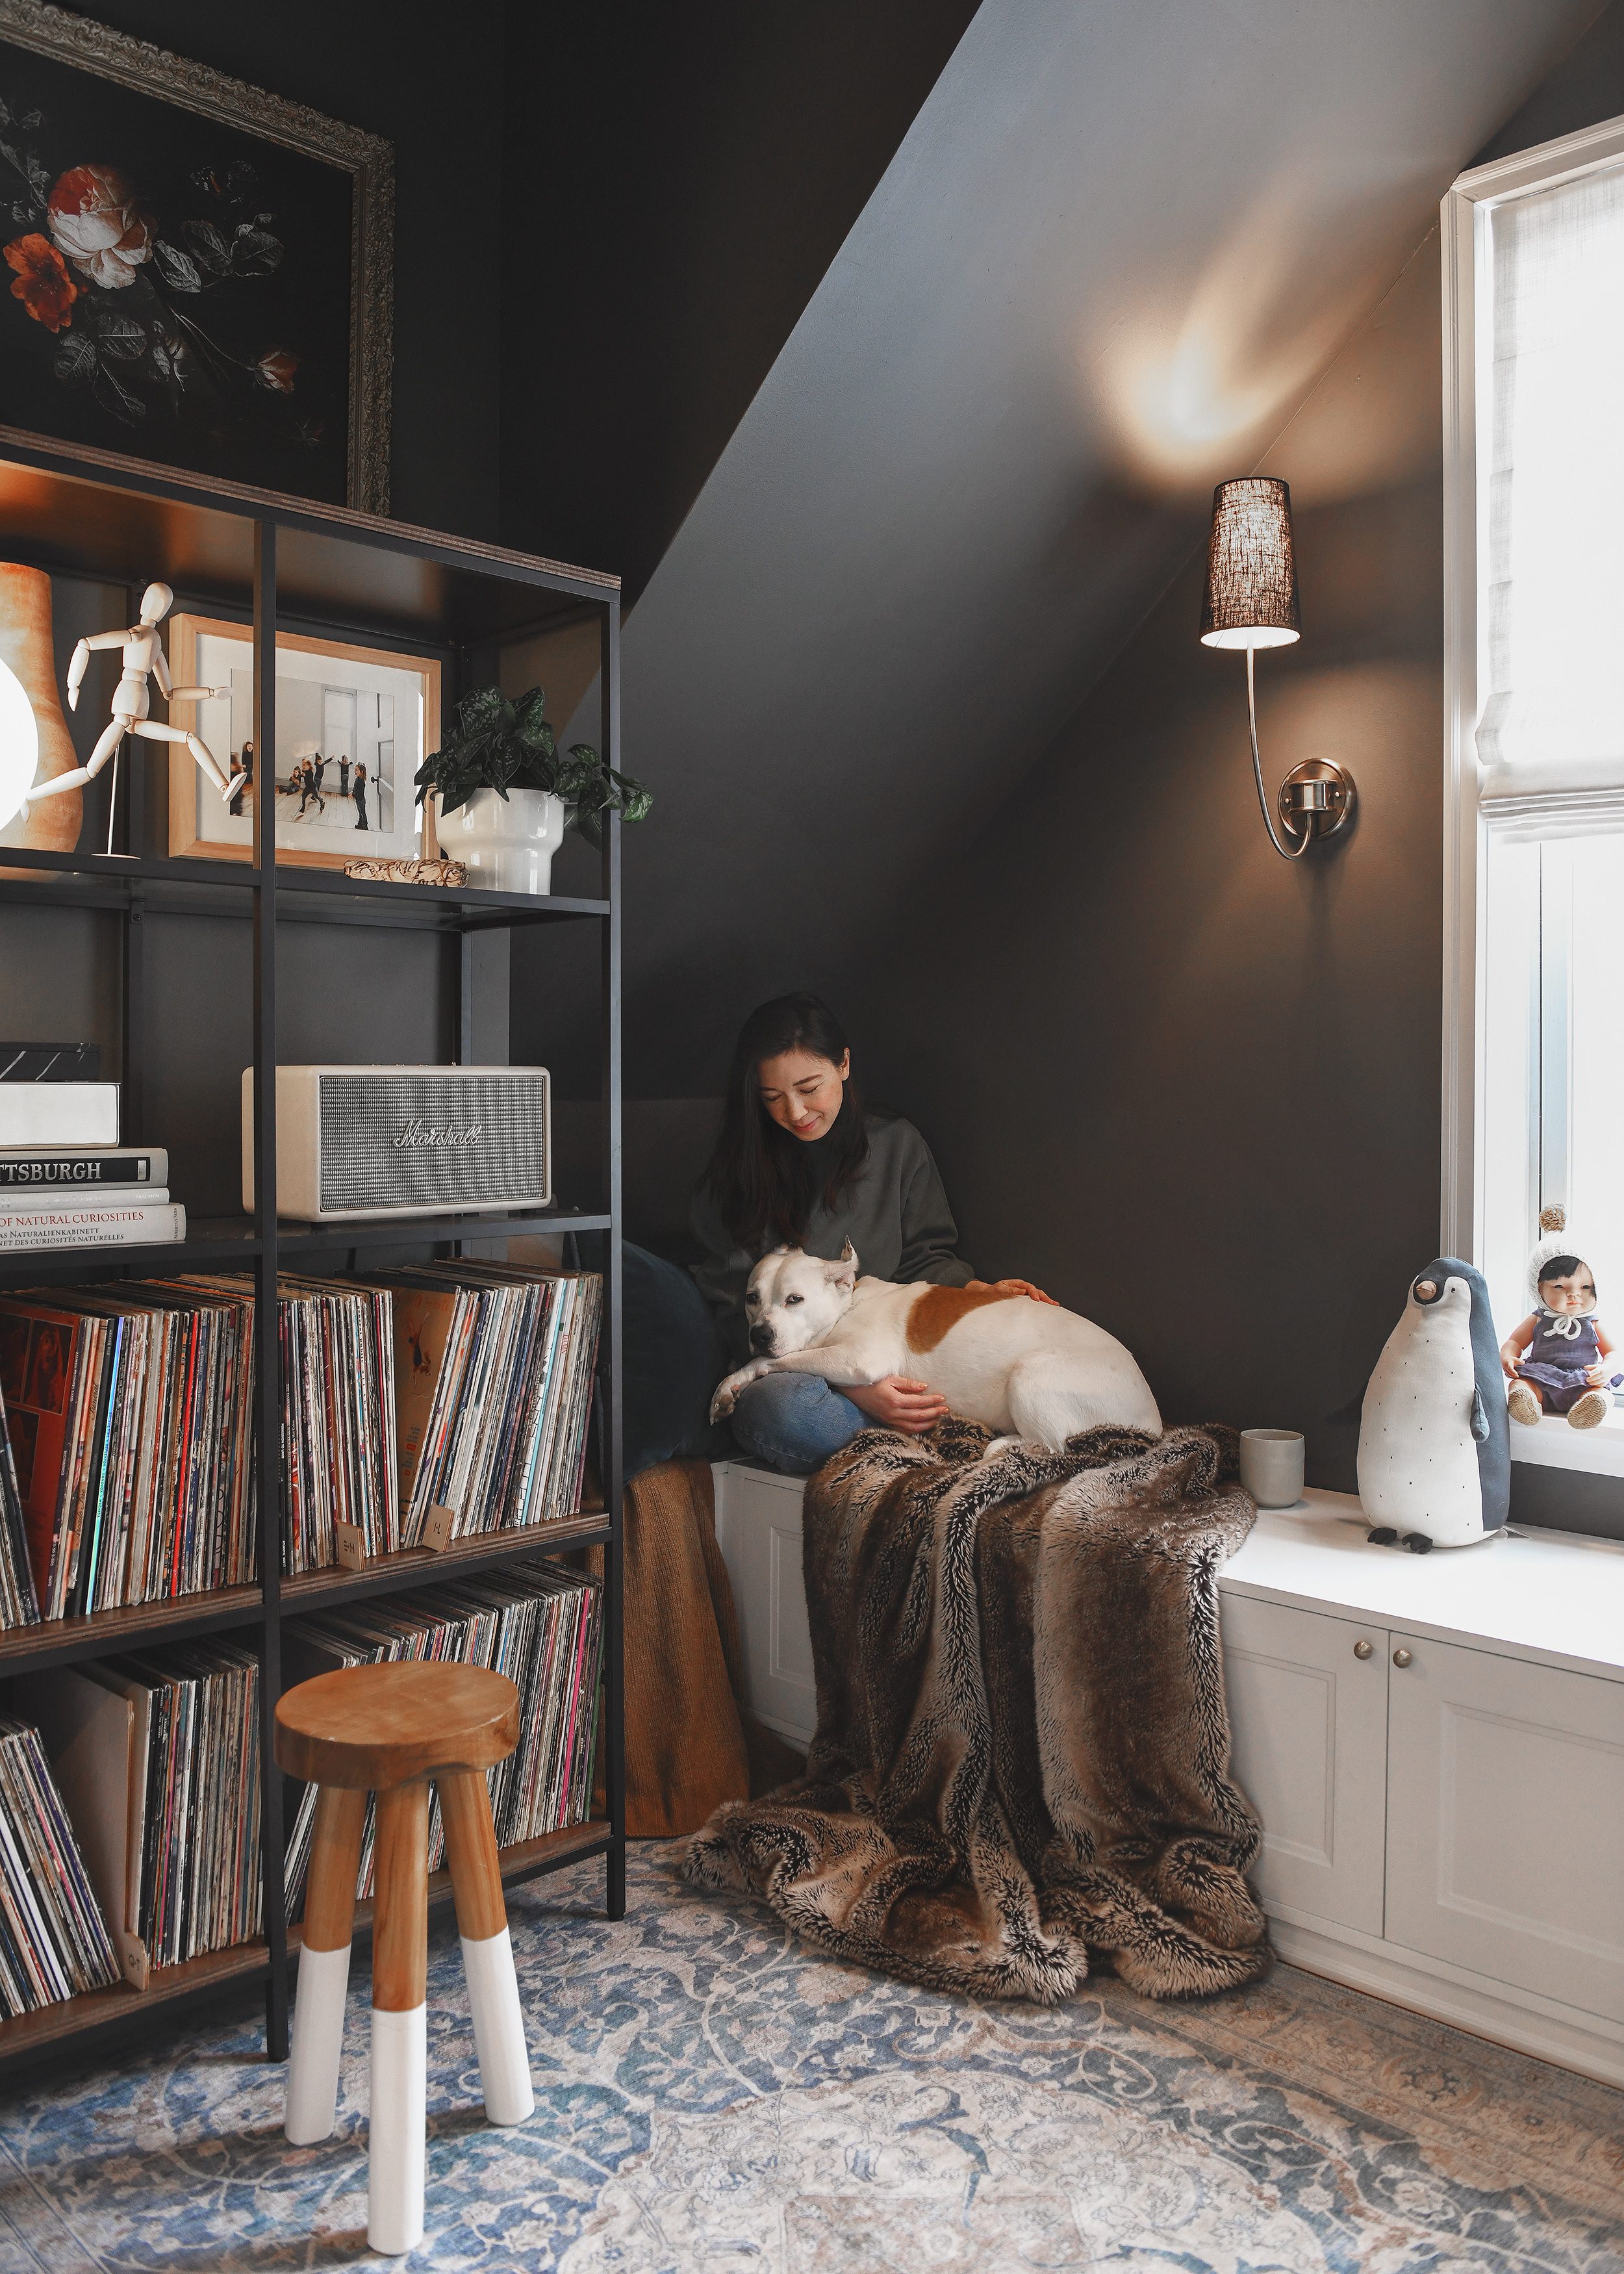 Kim and Catfish in the snug, bundled up with their favorite things | via Yellow Brick Home